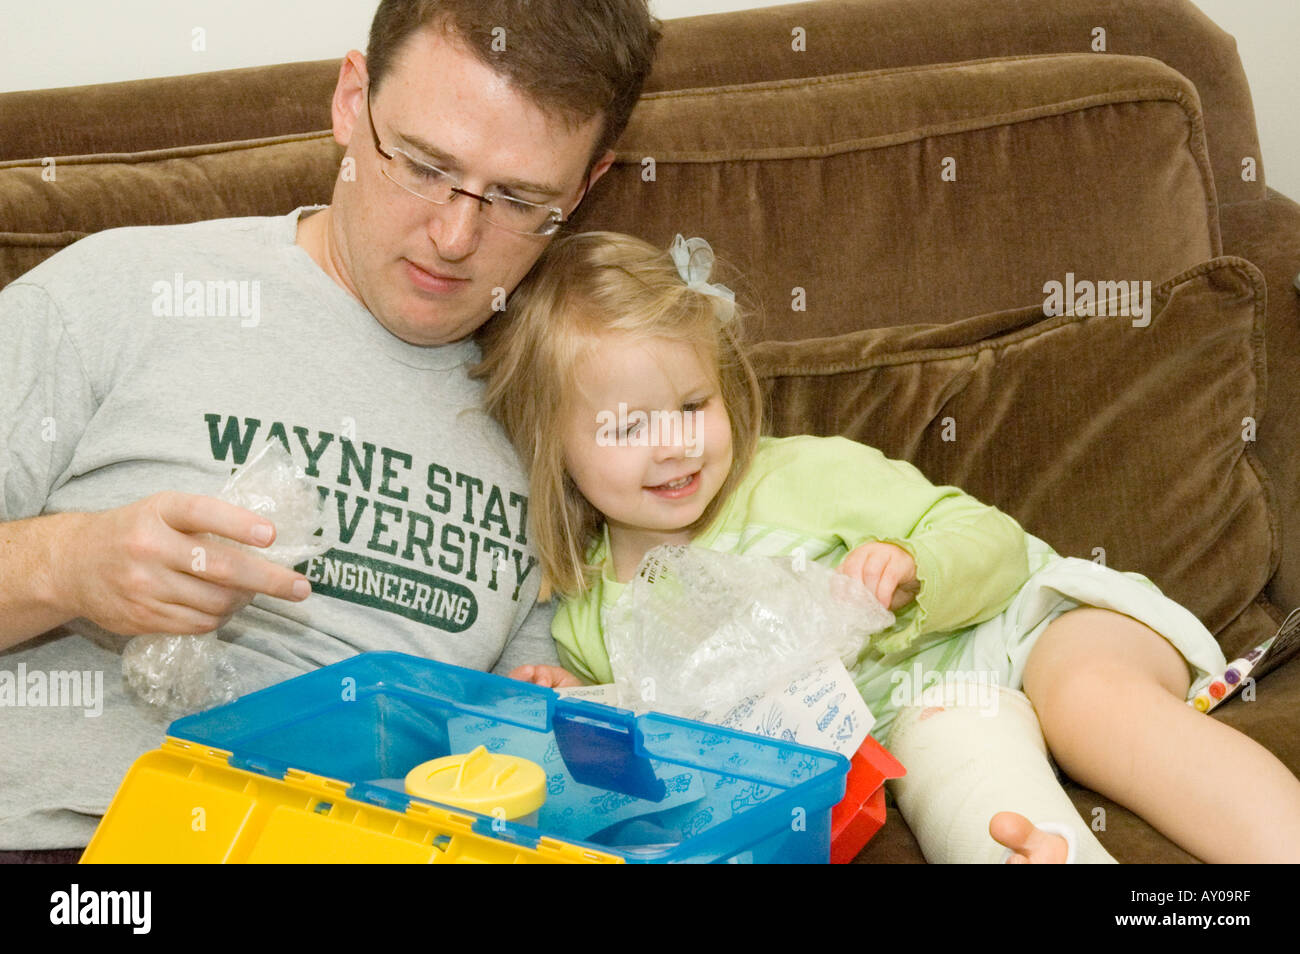 Little girl with broken leg reviews contents of a new toy box Stock Photo